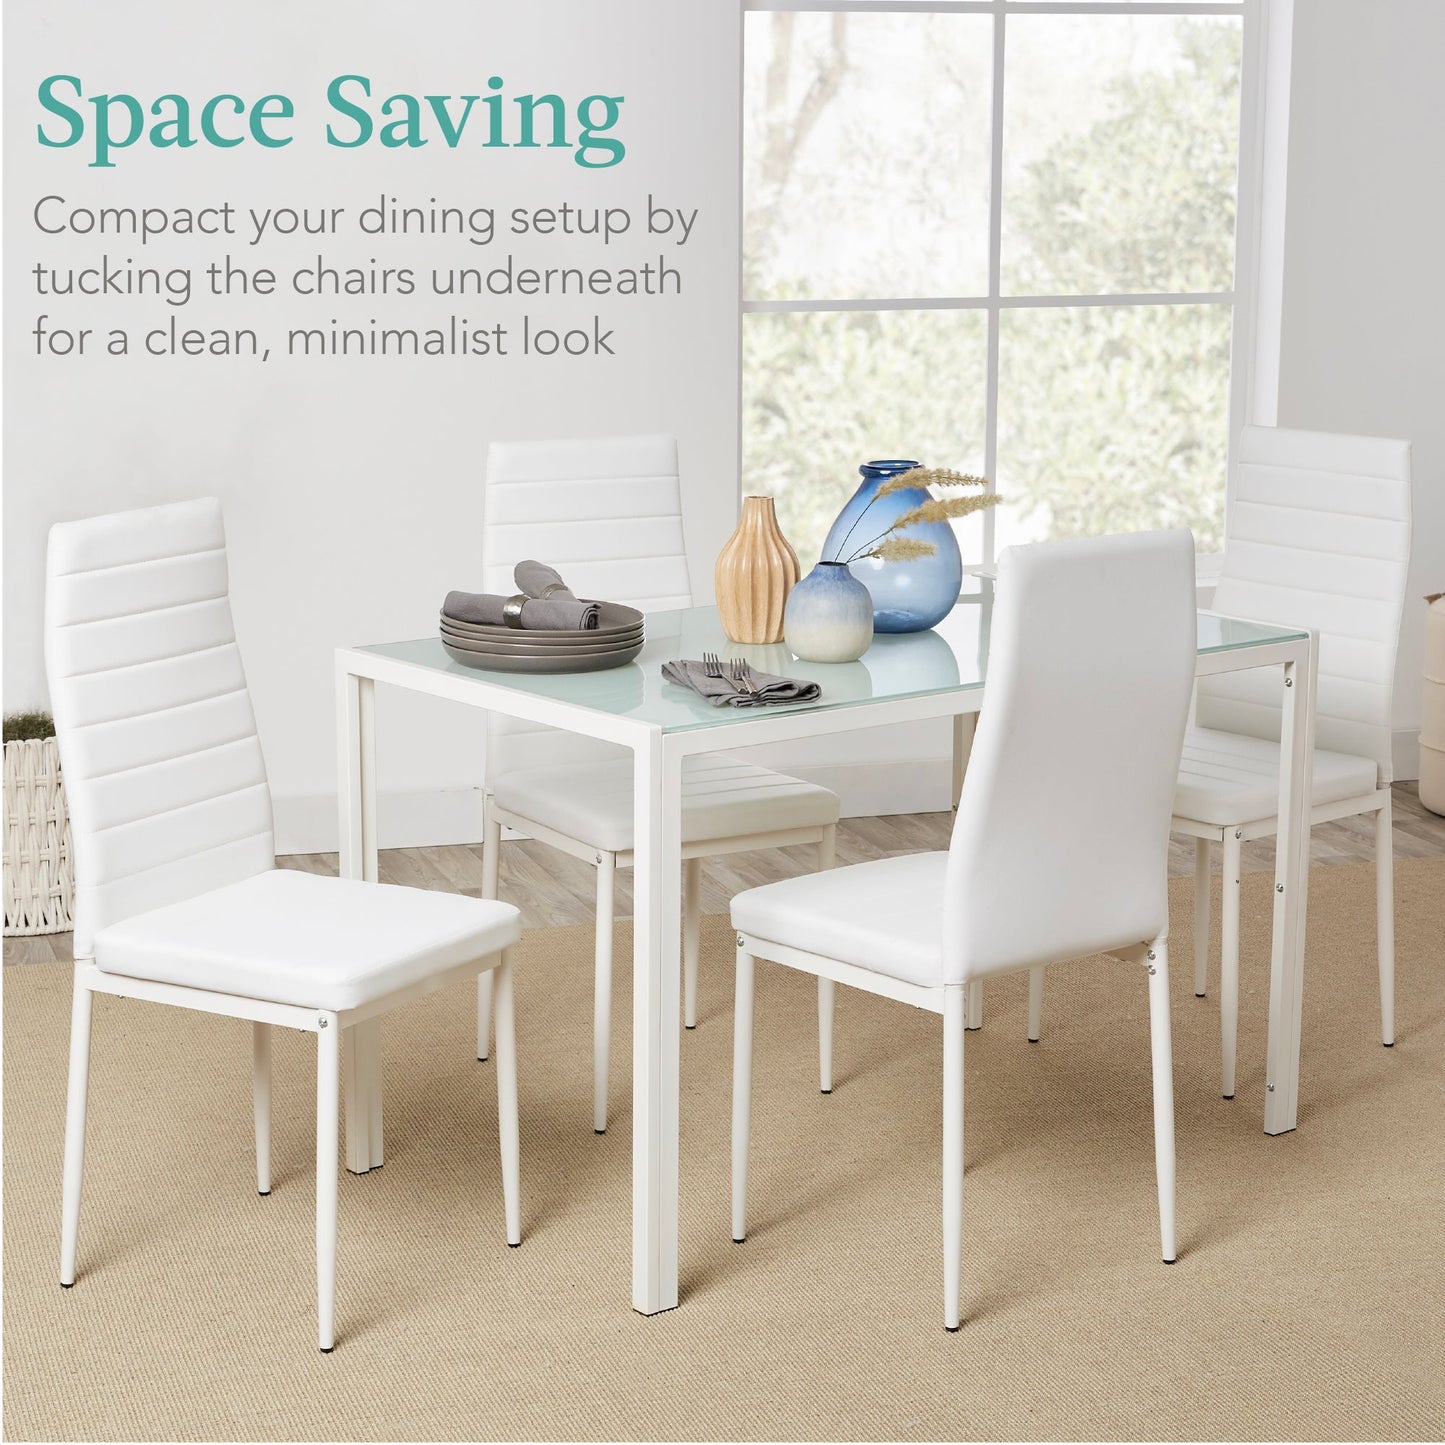 5-Piece Dining Table Set w/ Glass Top, Leather Chairs